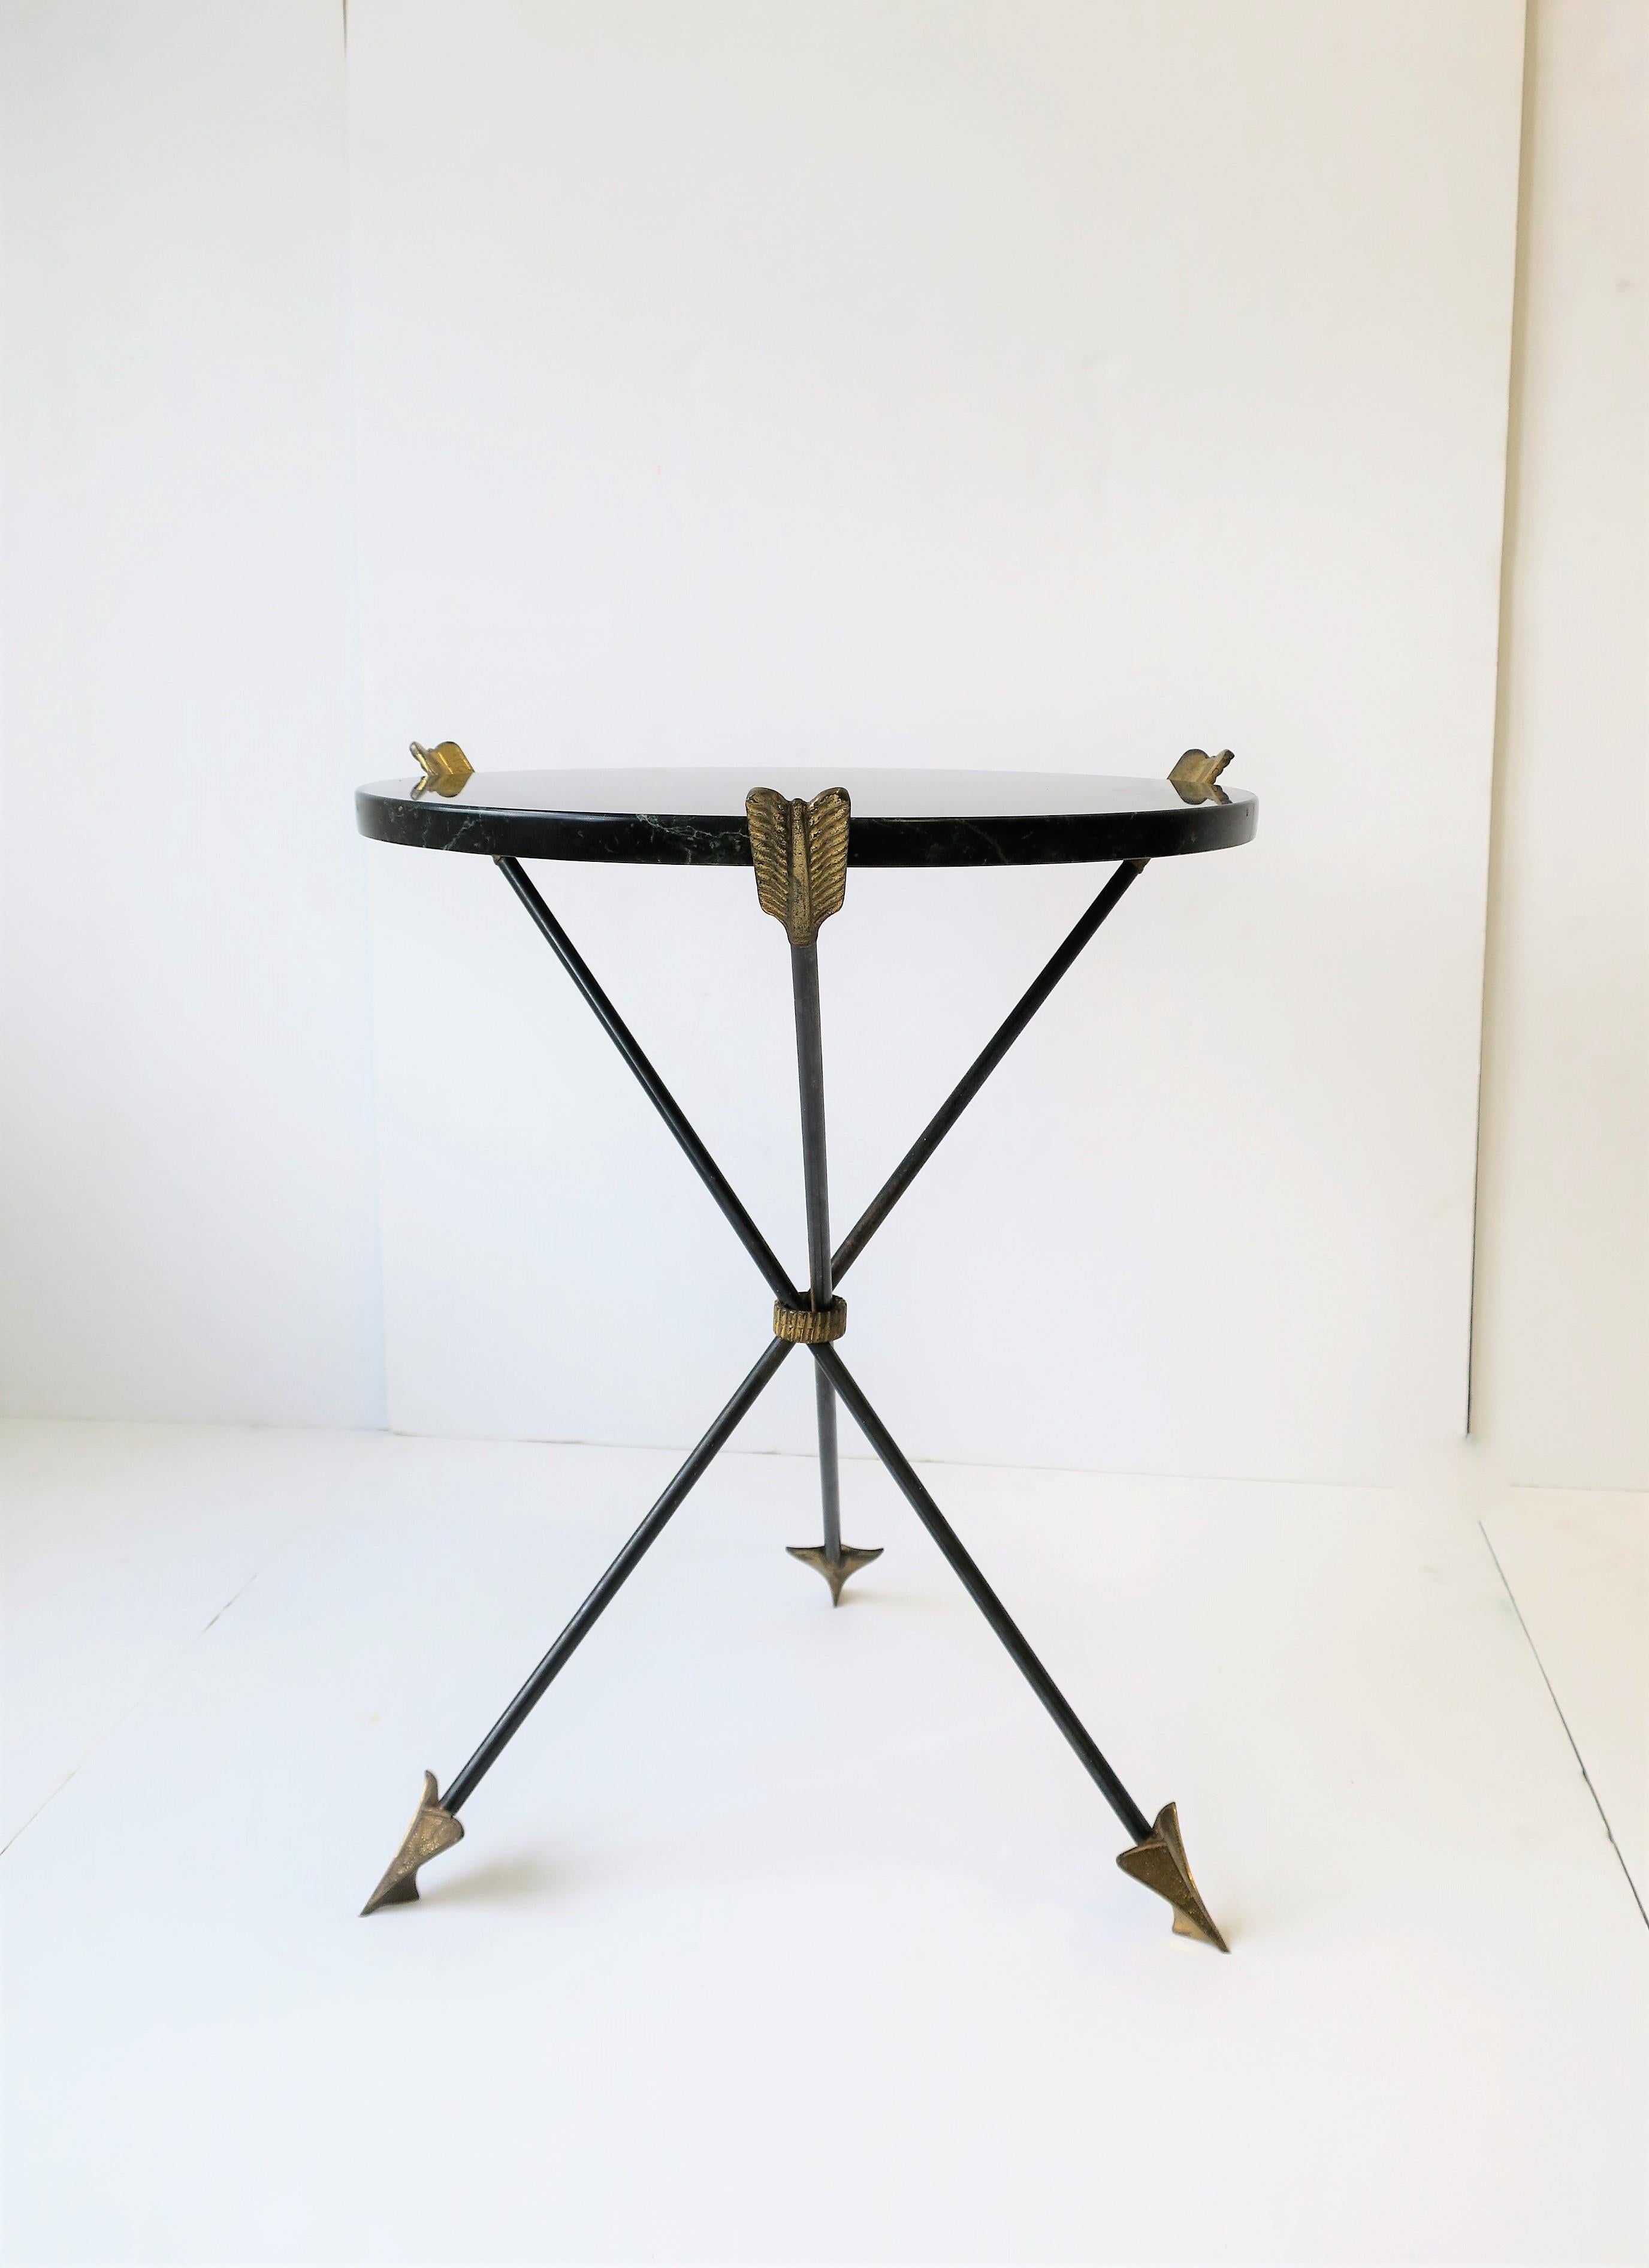 Enameled Italian Neoclassical Marble and Brass Tripod Side Table or Guéridon